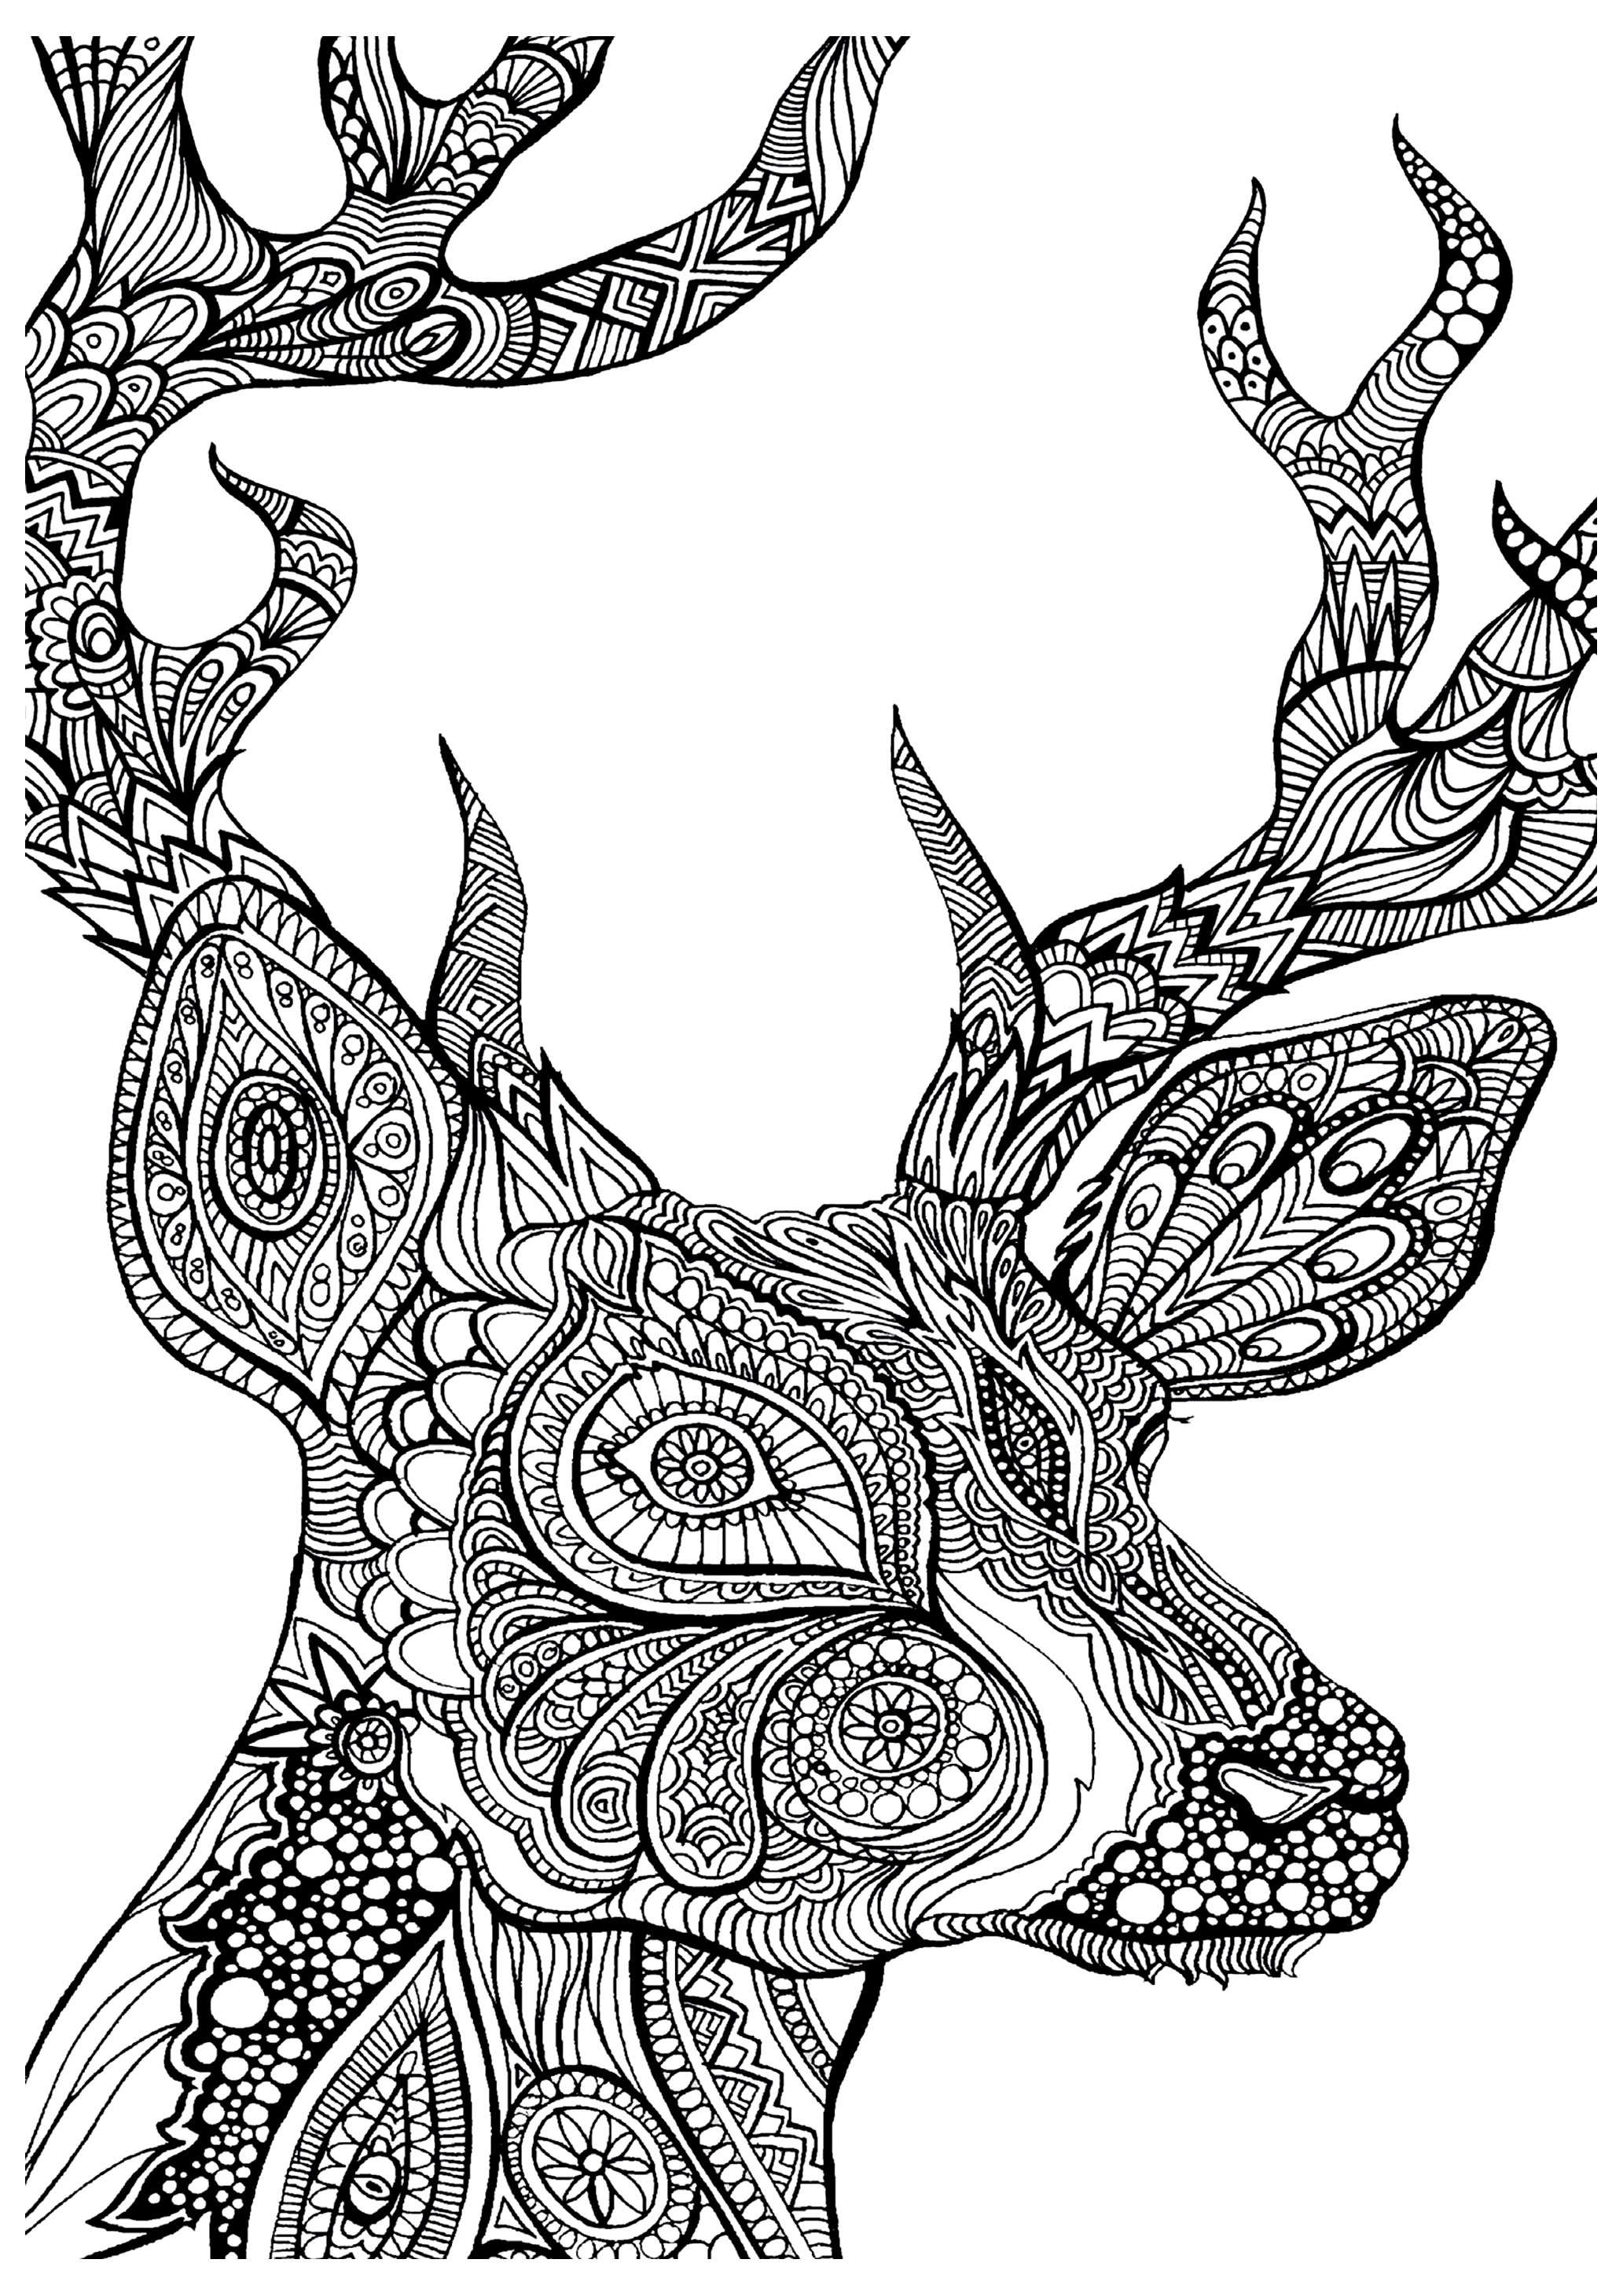 Colouring Page   Coloring photo 20   fanpop